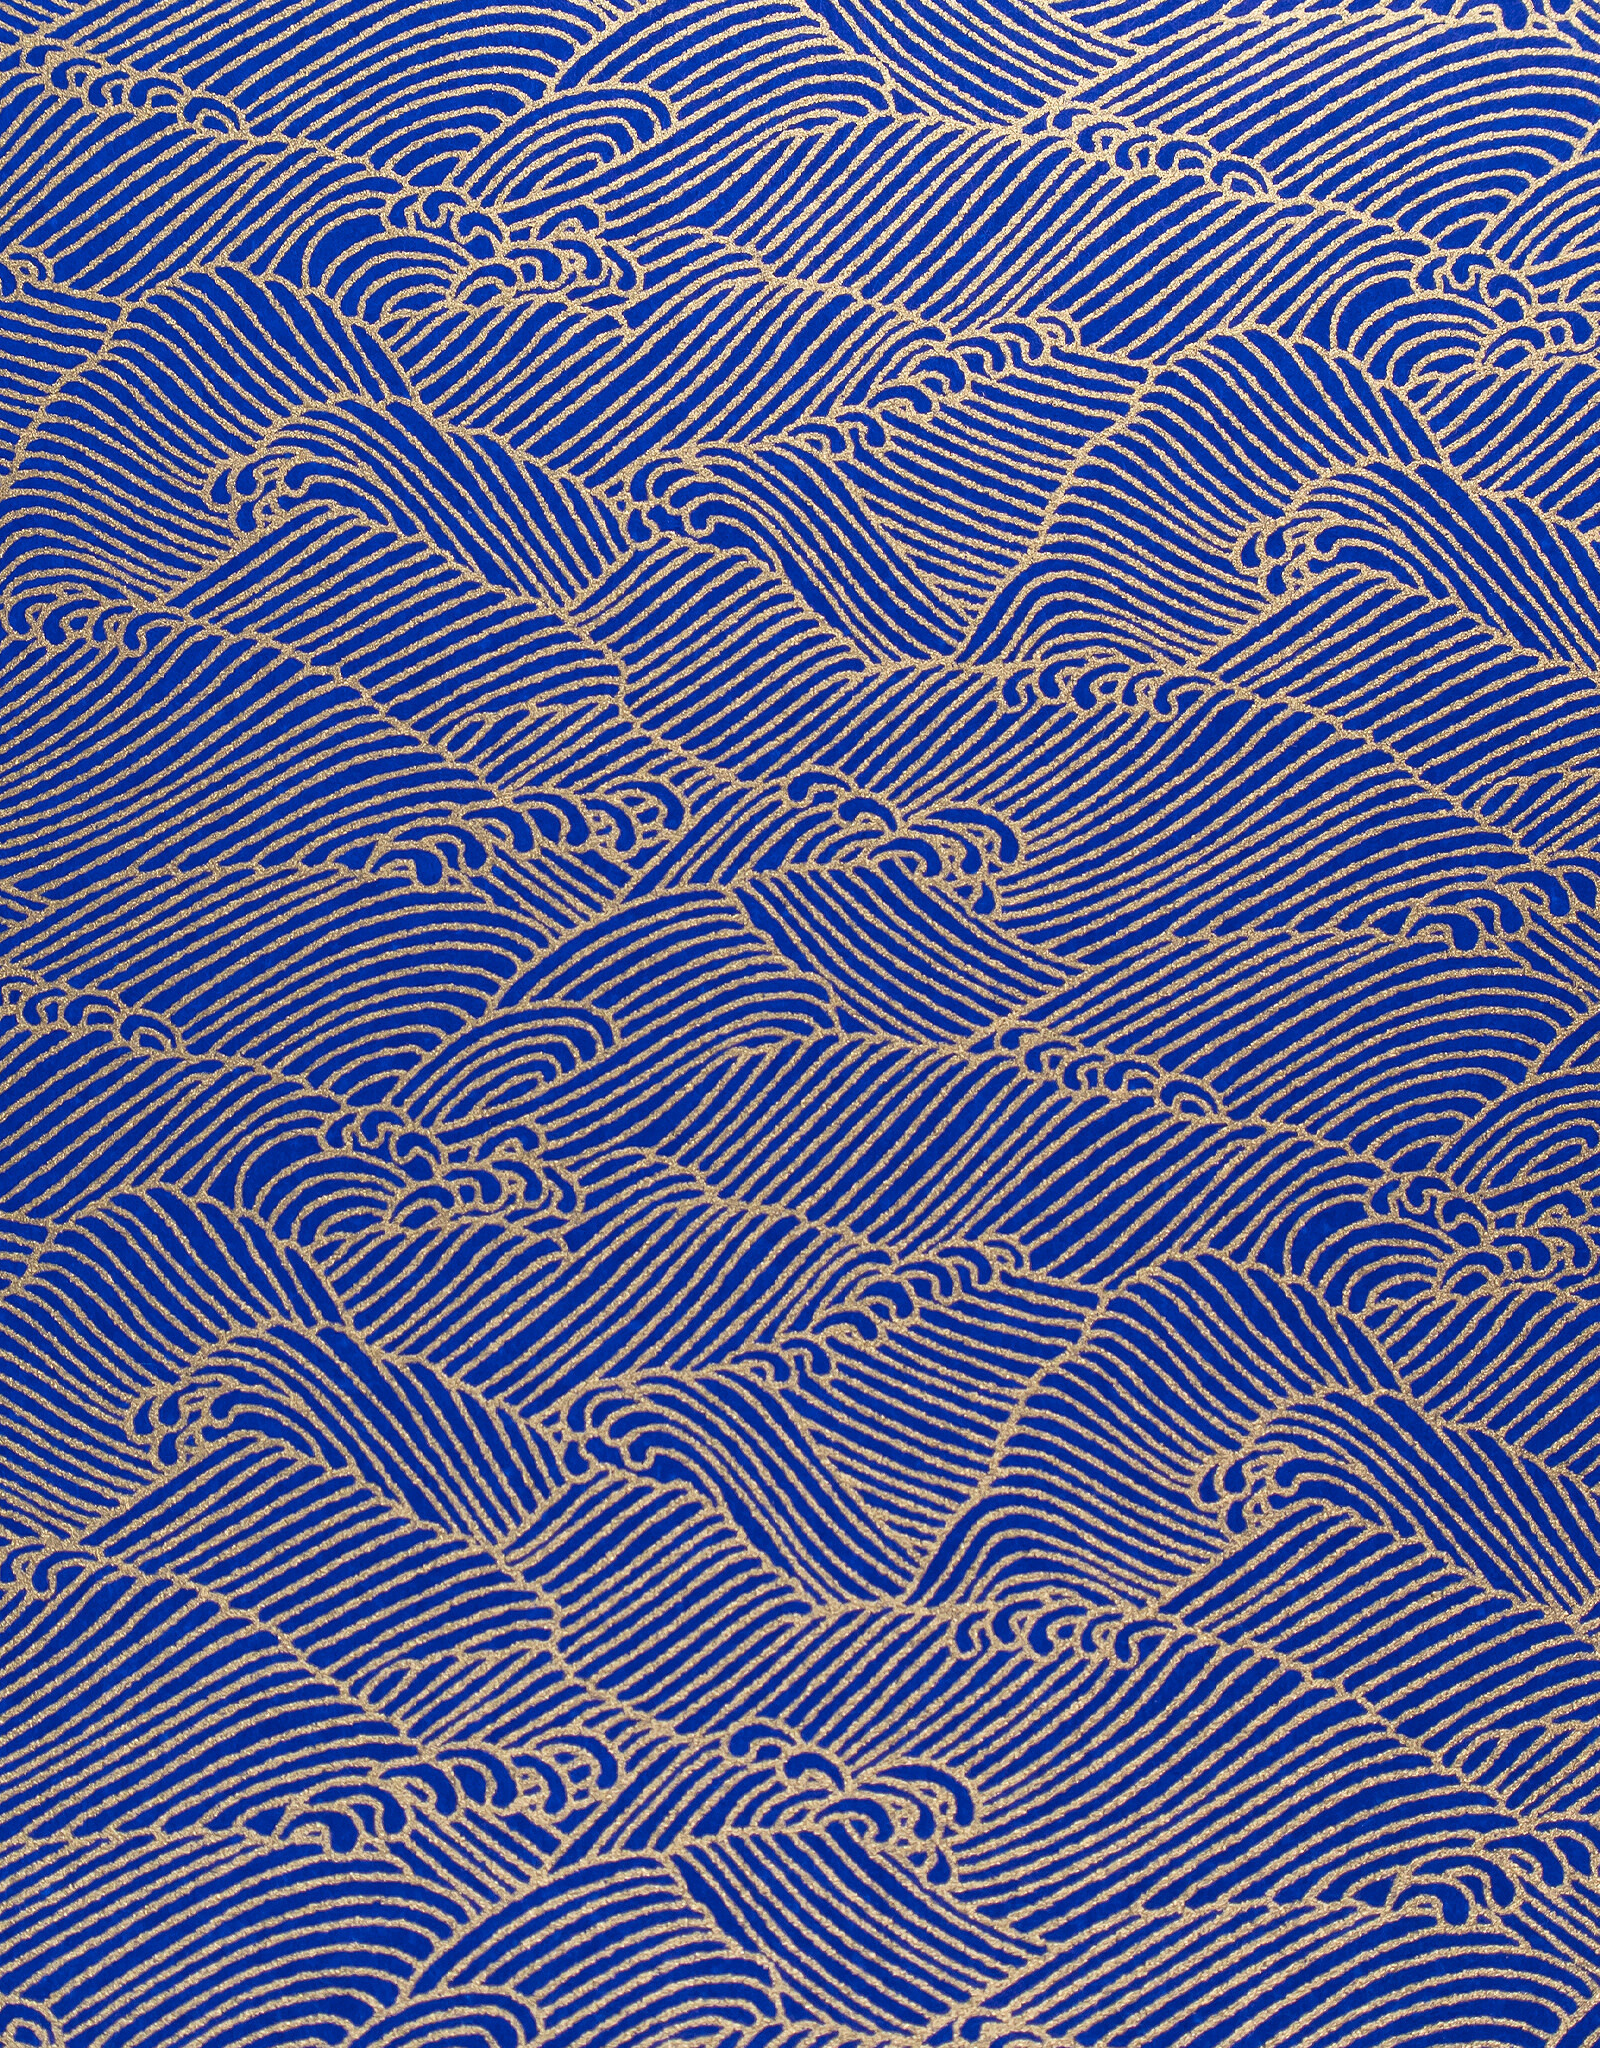 AITOH Aitoh Yuzenshi: Blue with Gold Waves, 19.25" x 26"